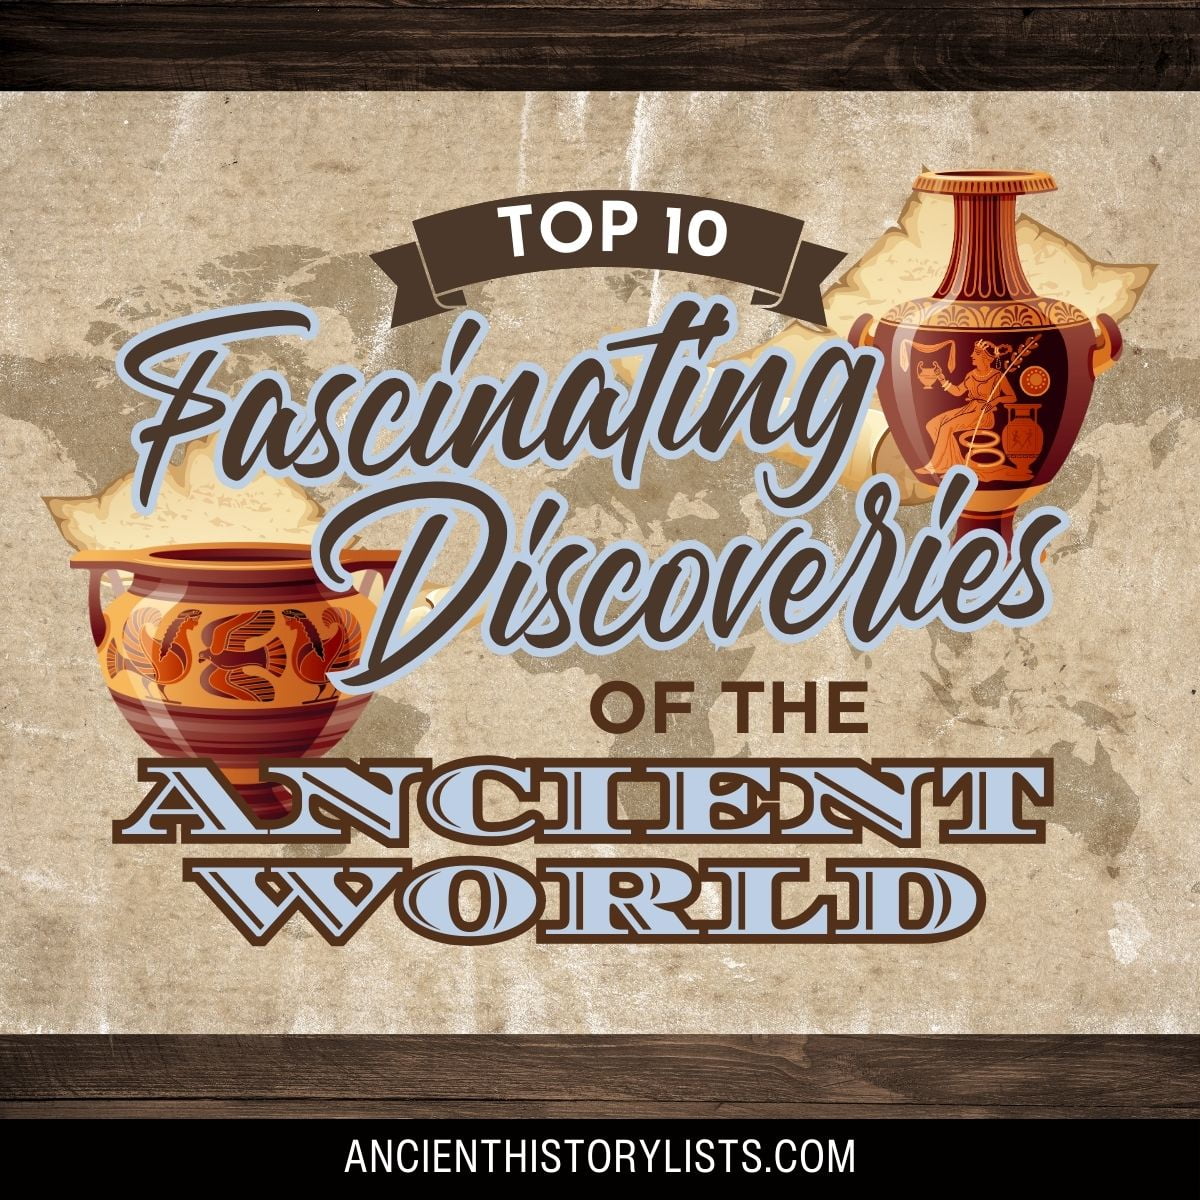 Fascinating Discoveries of the Ancient World